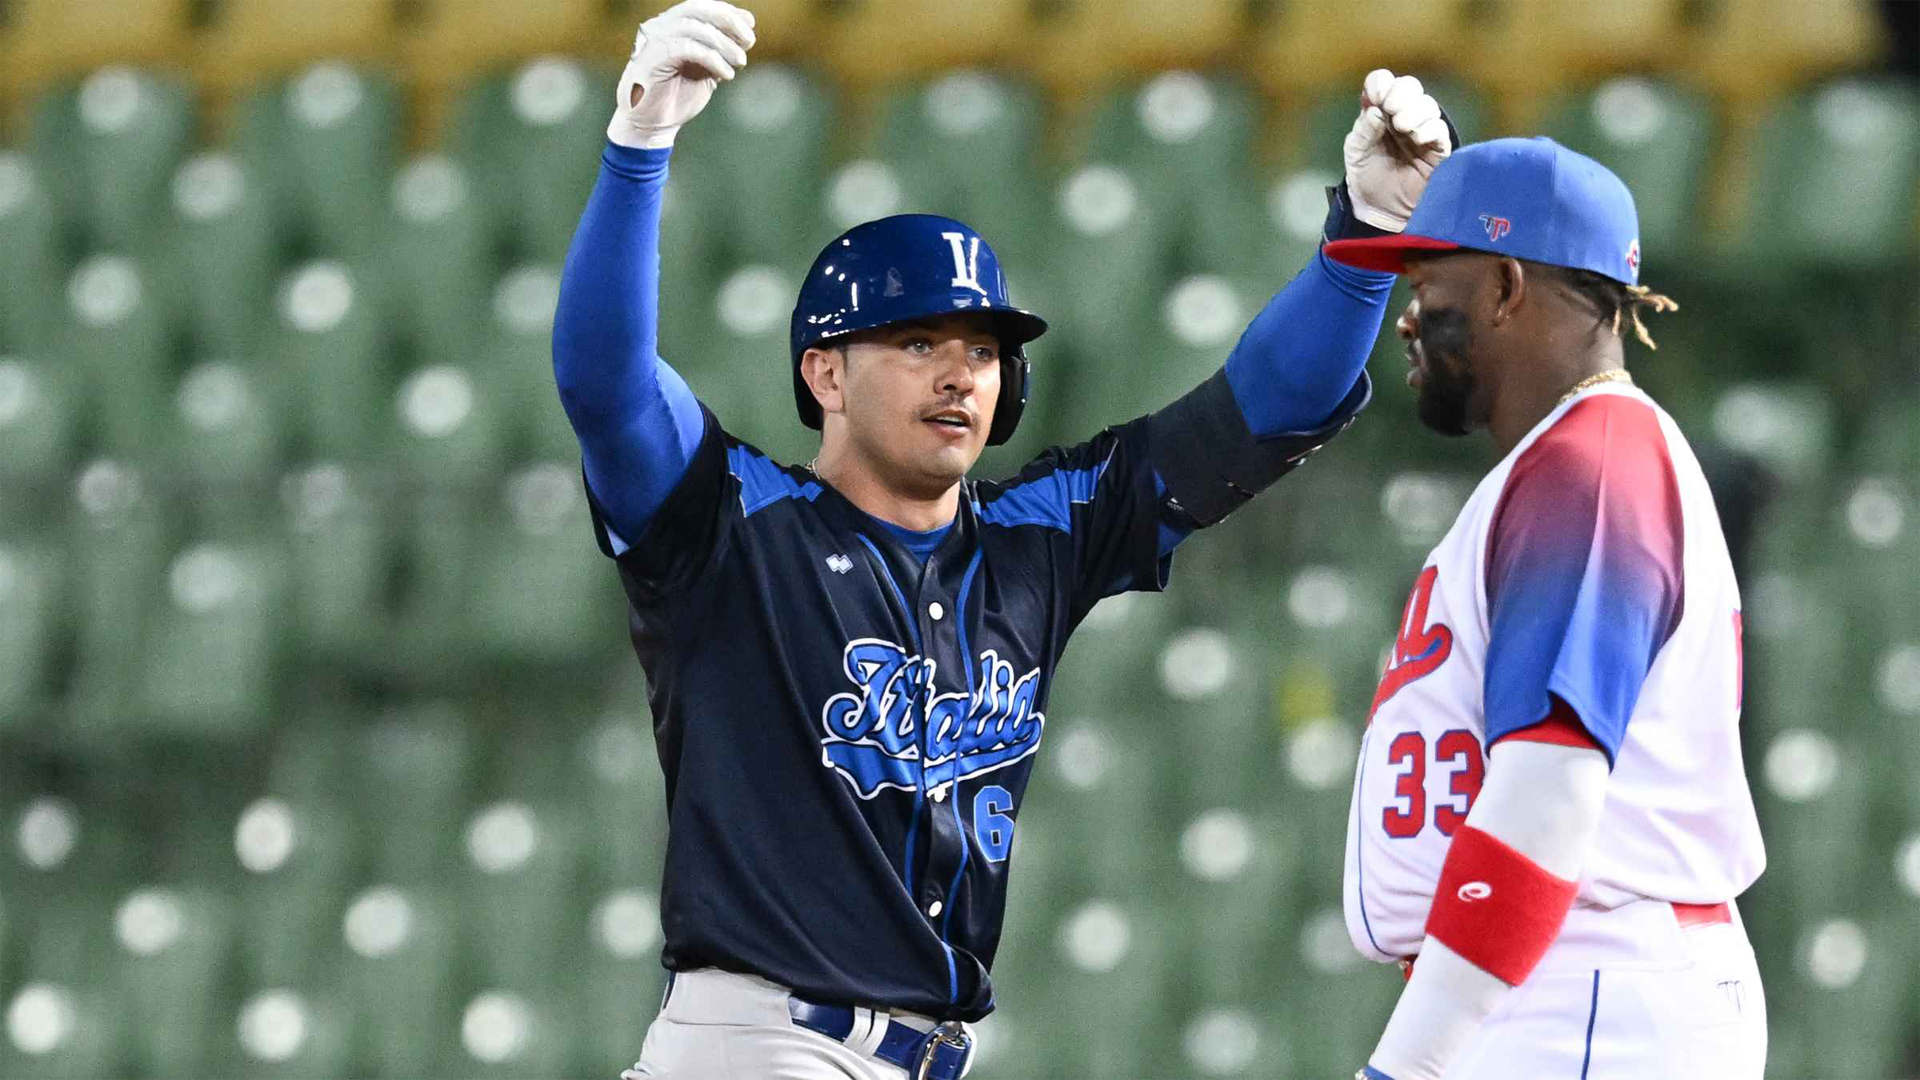 Team Italy Scores Huge Win in World Baseball Classic